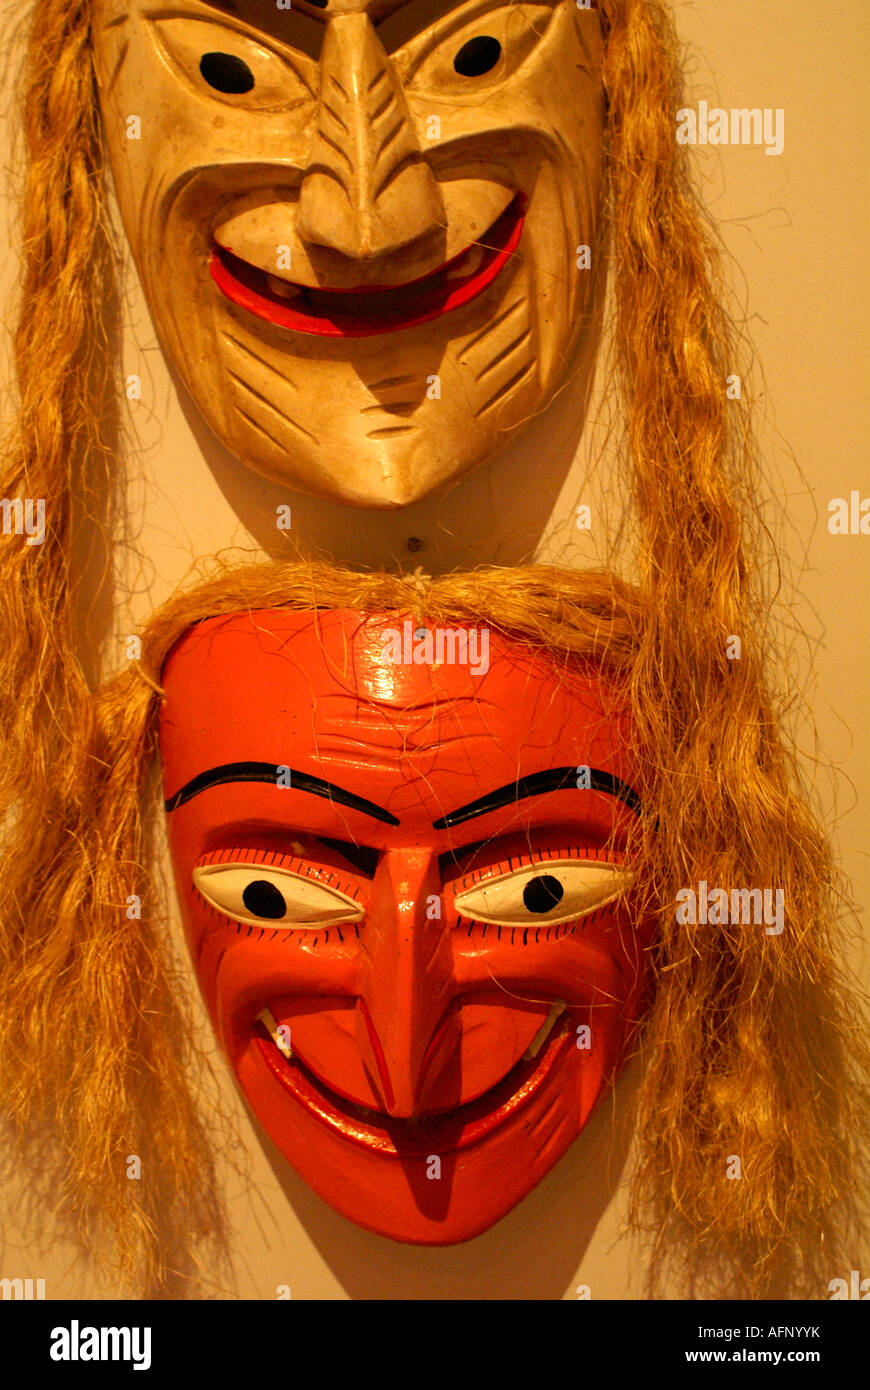 Old men Mexican ceremonial masks used in the Dance of the Viejitos, Museo  Casa de la Mascara mask museum, Acapulco, Mexico Stock Photo - Alamy